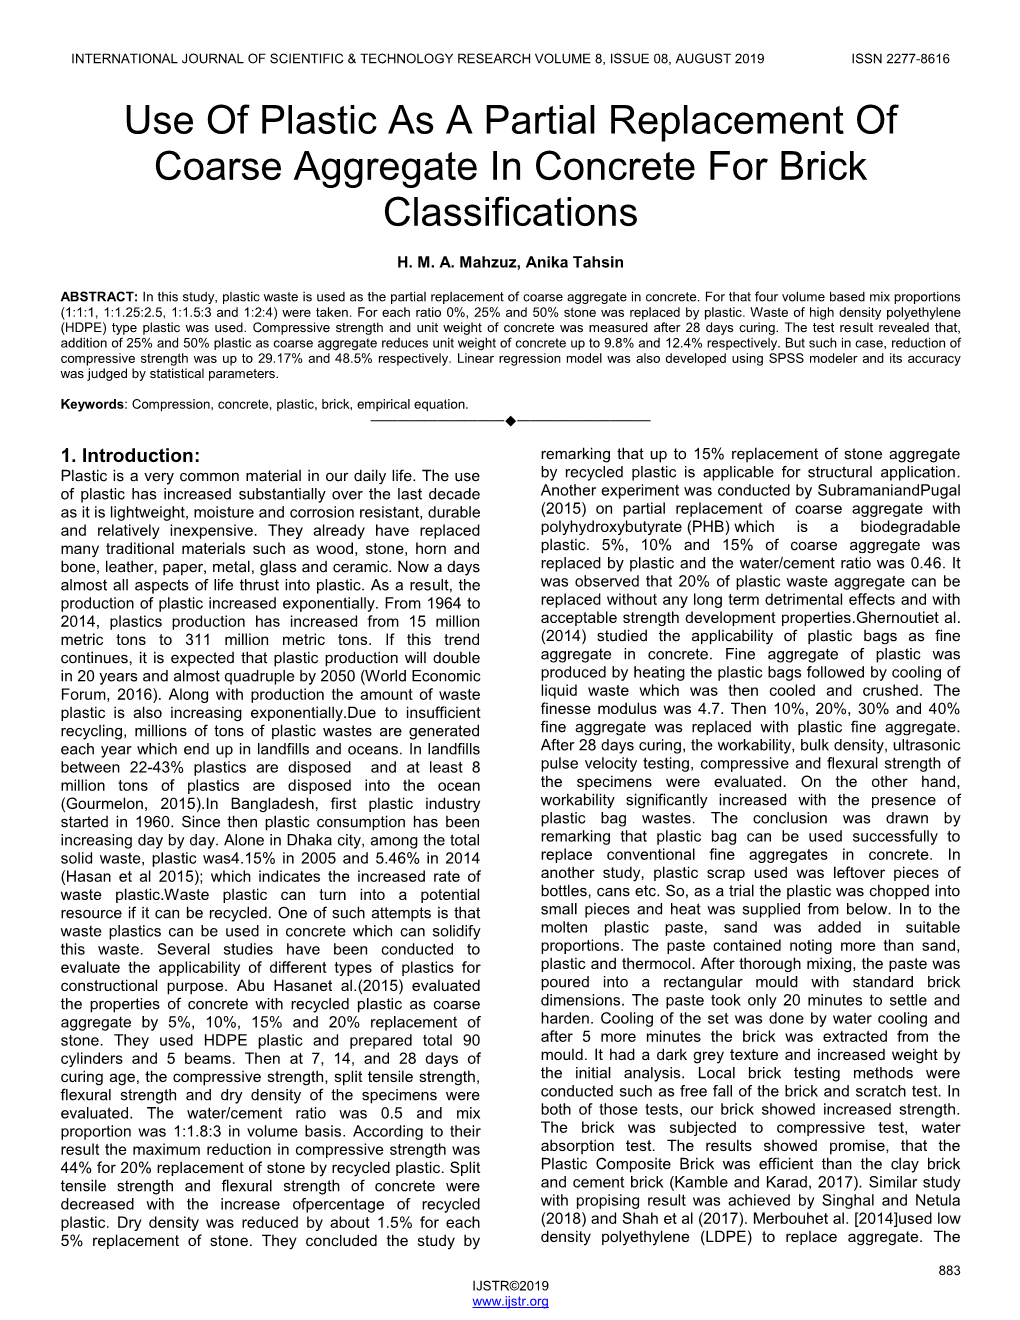 Use of Plastic As a Partial Replacement of Coarse Aggregate in Concrete for Brick Classifications